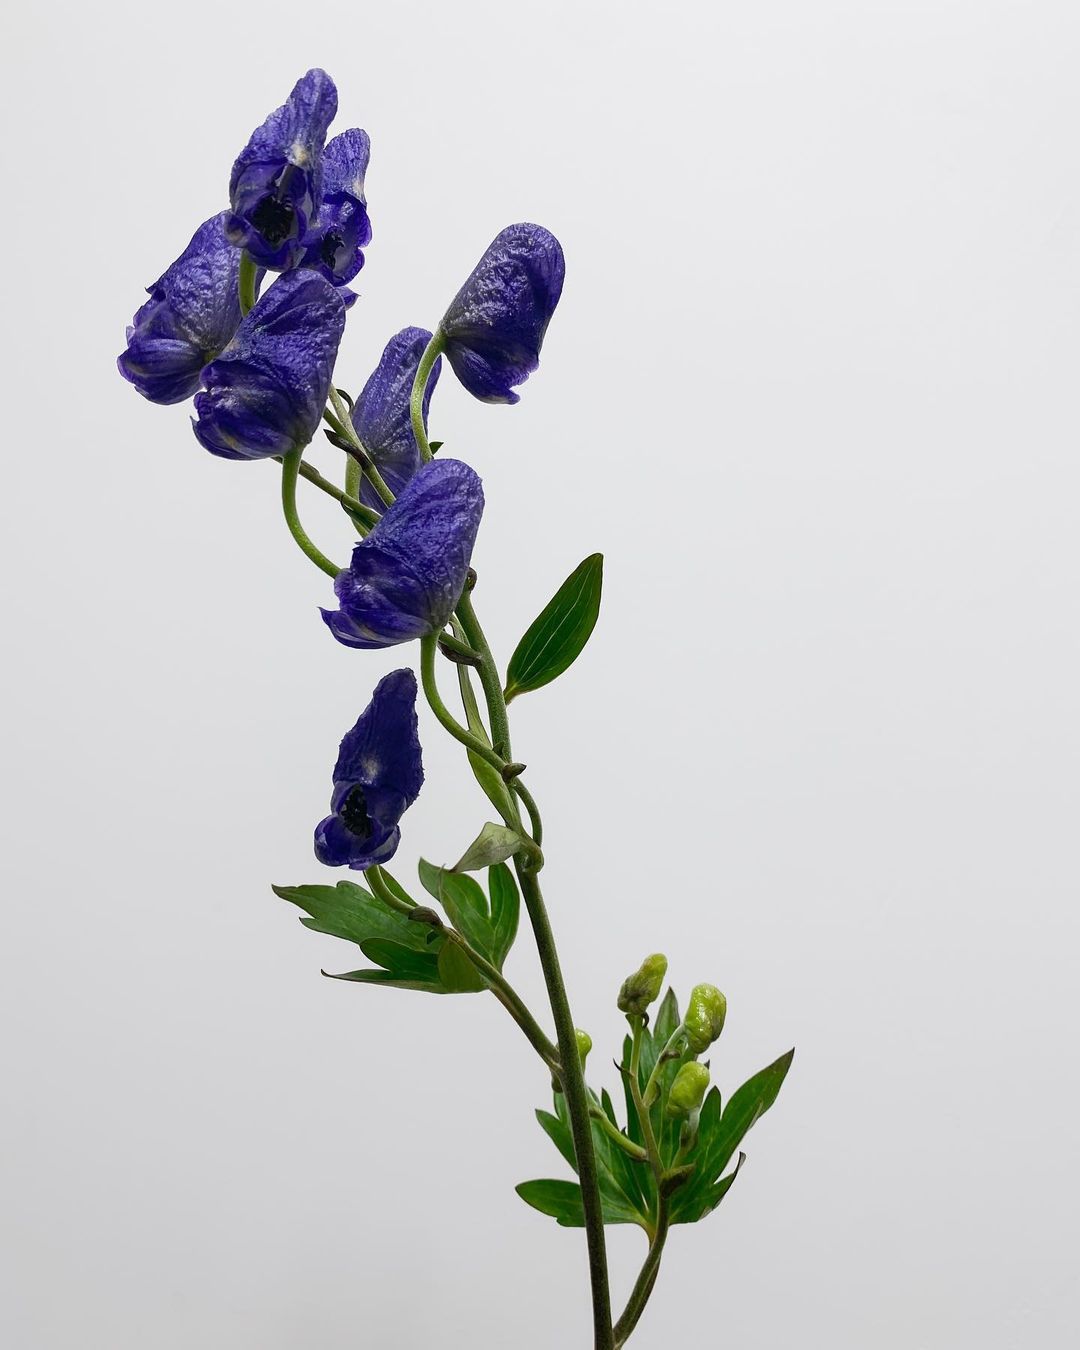 How To Grow And Care For Aconitum